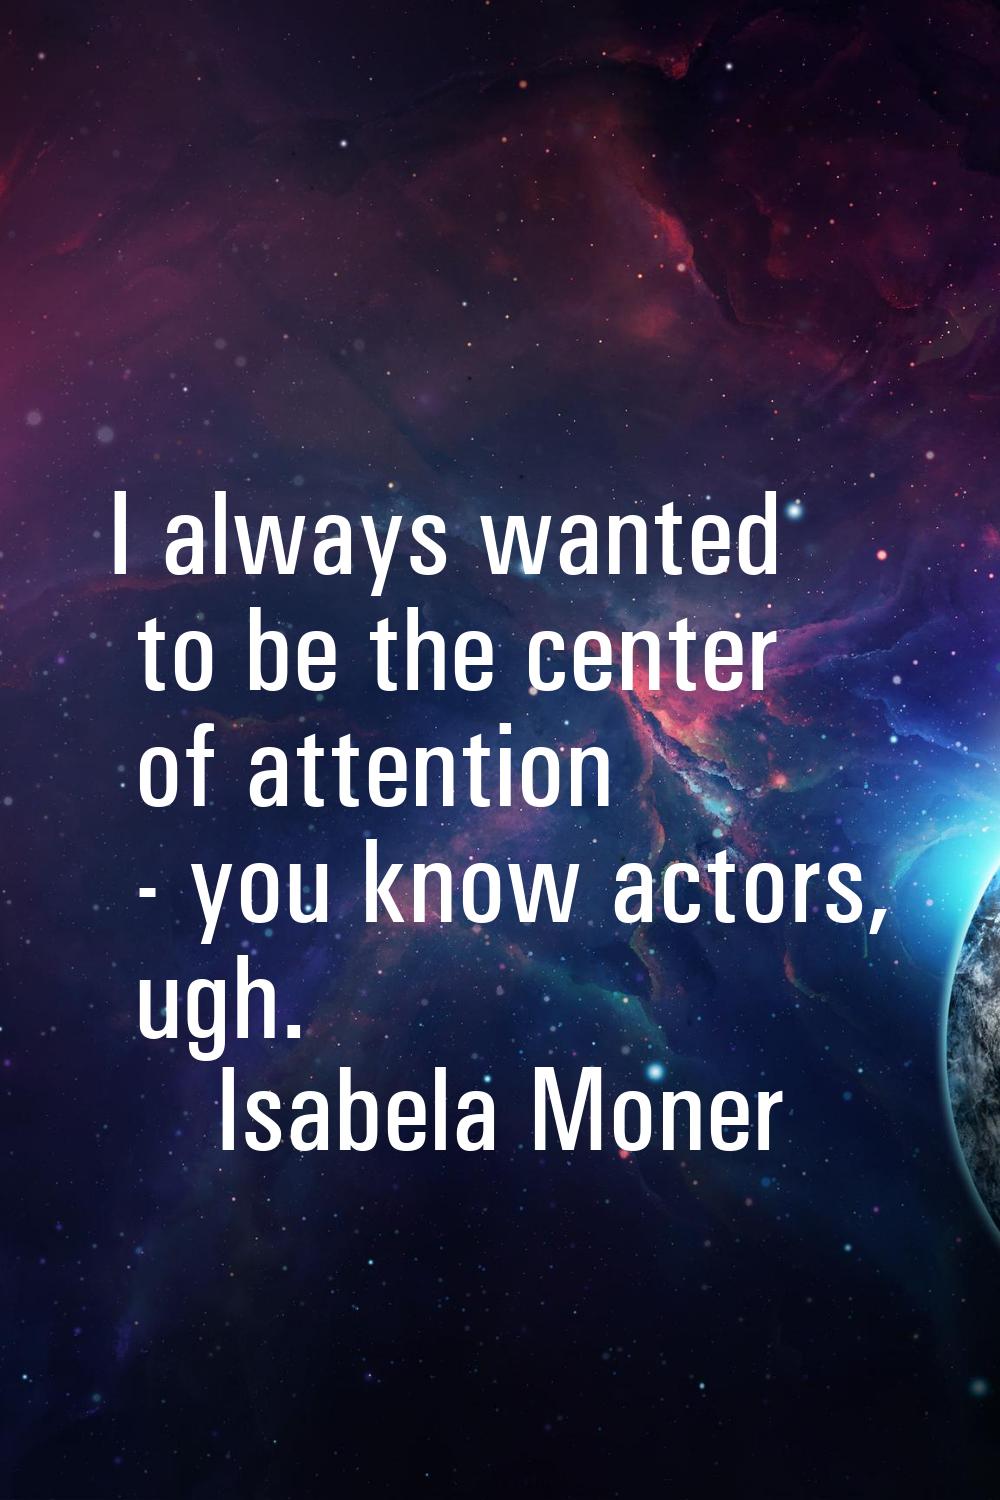 I always wanted to be the center of attention - you know actors, ugh.